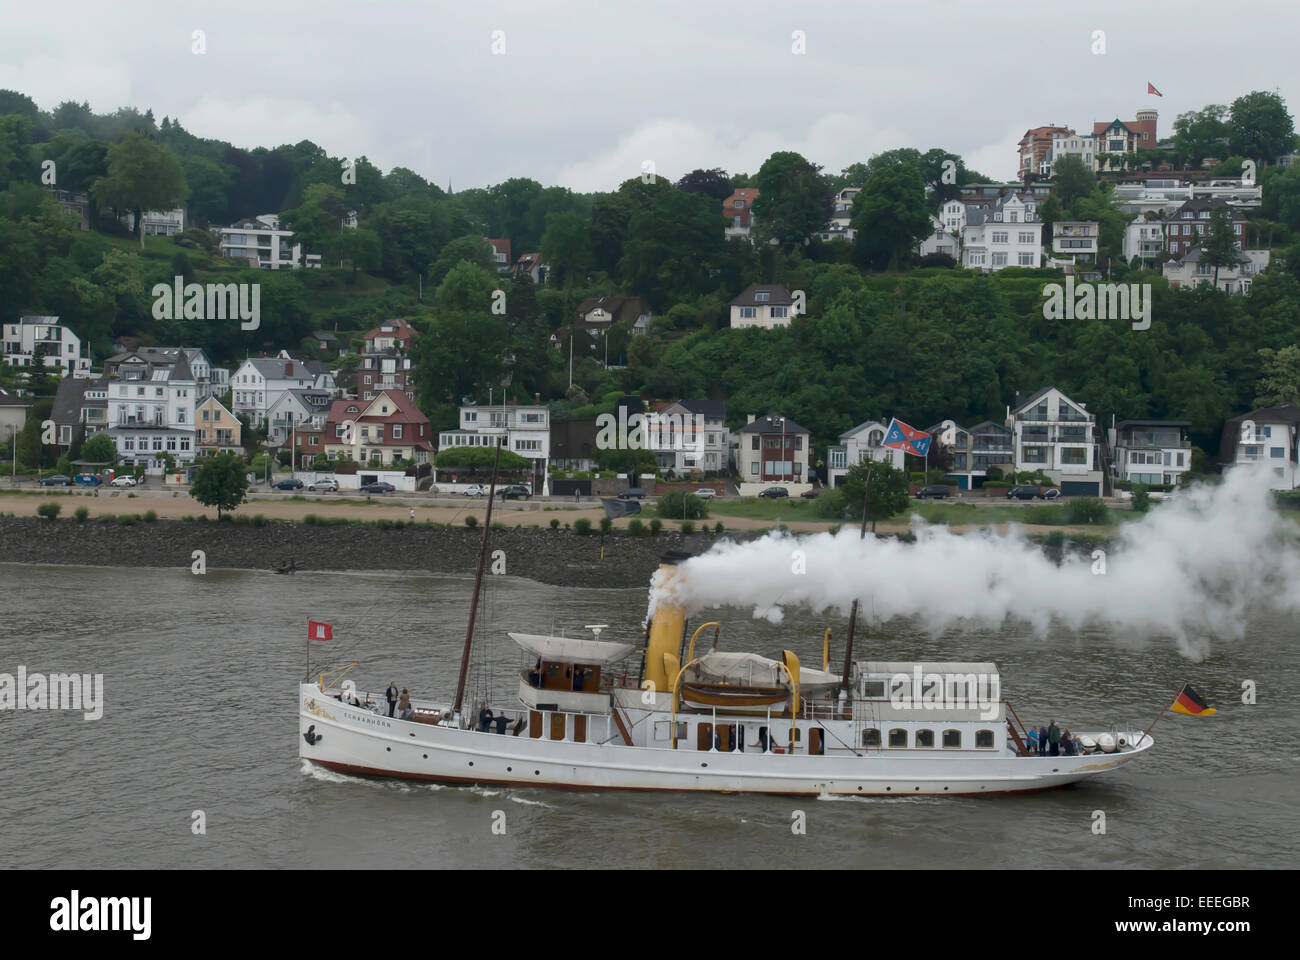 Hamburg, Germany, view from a boat on Blankenese Stock Photo